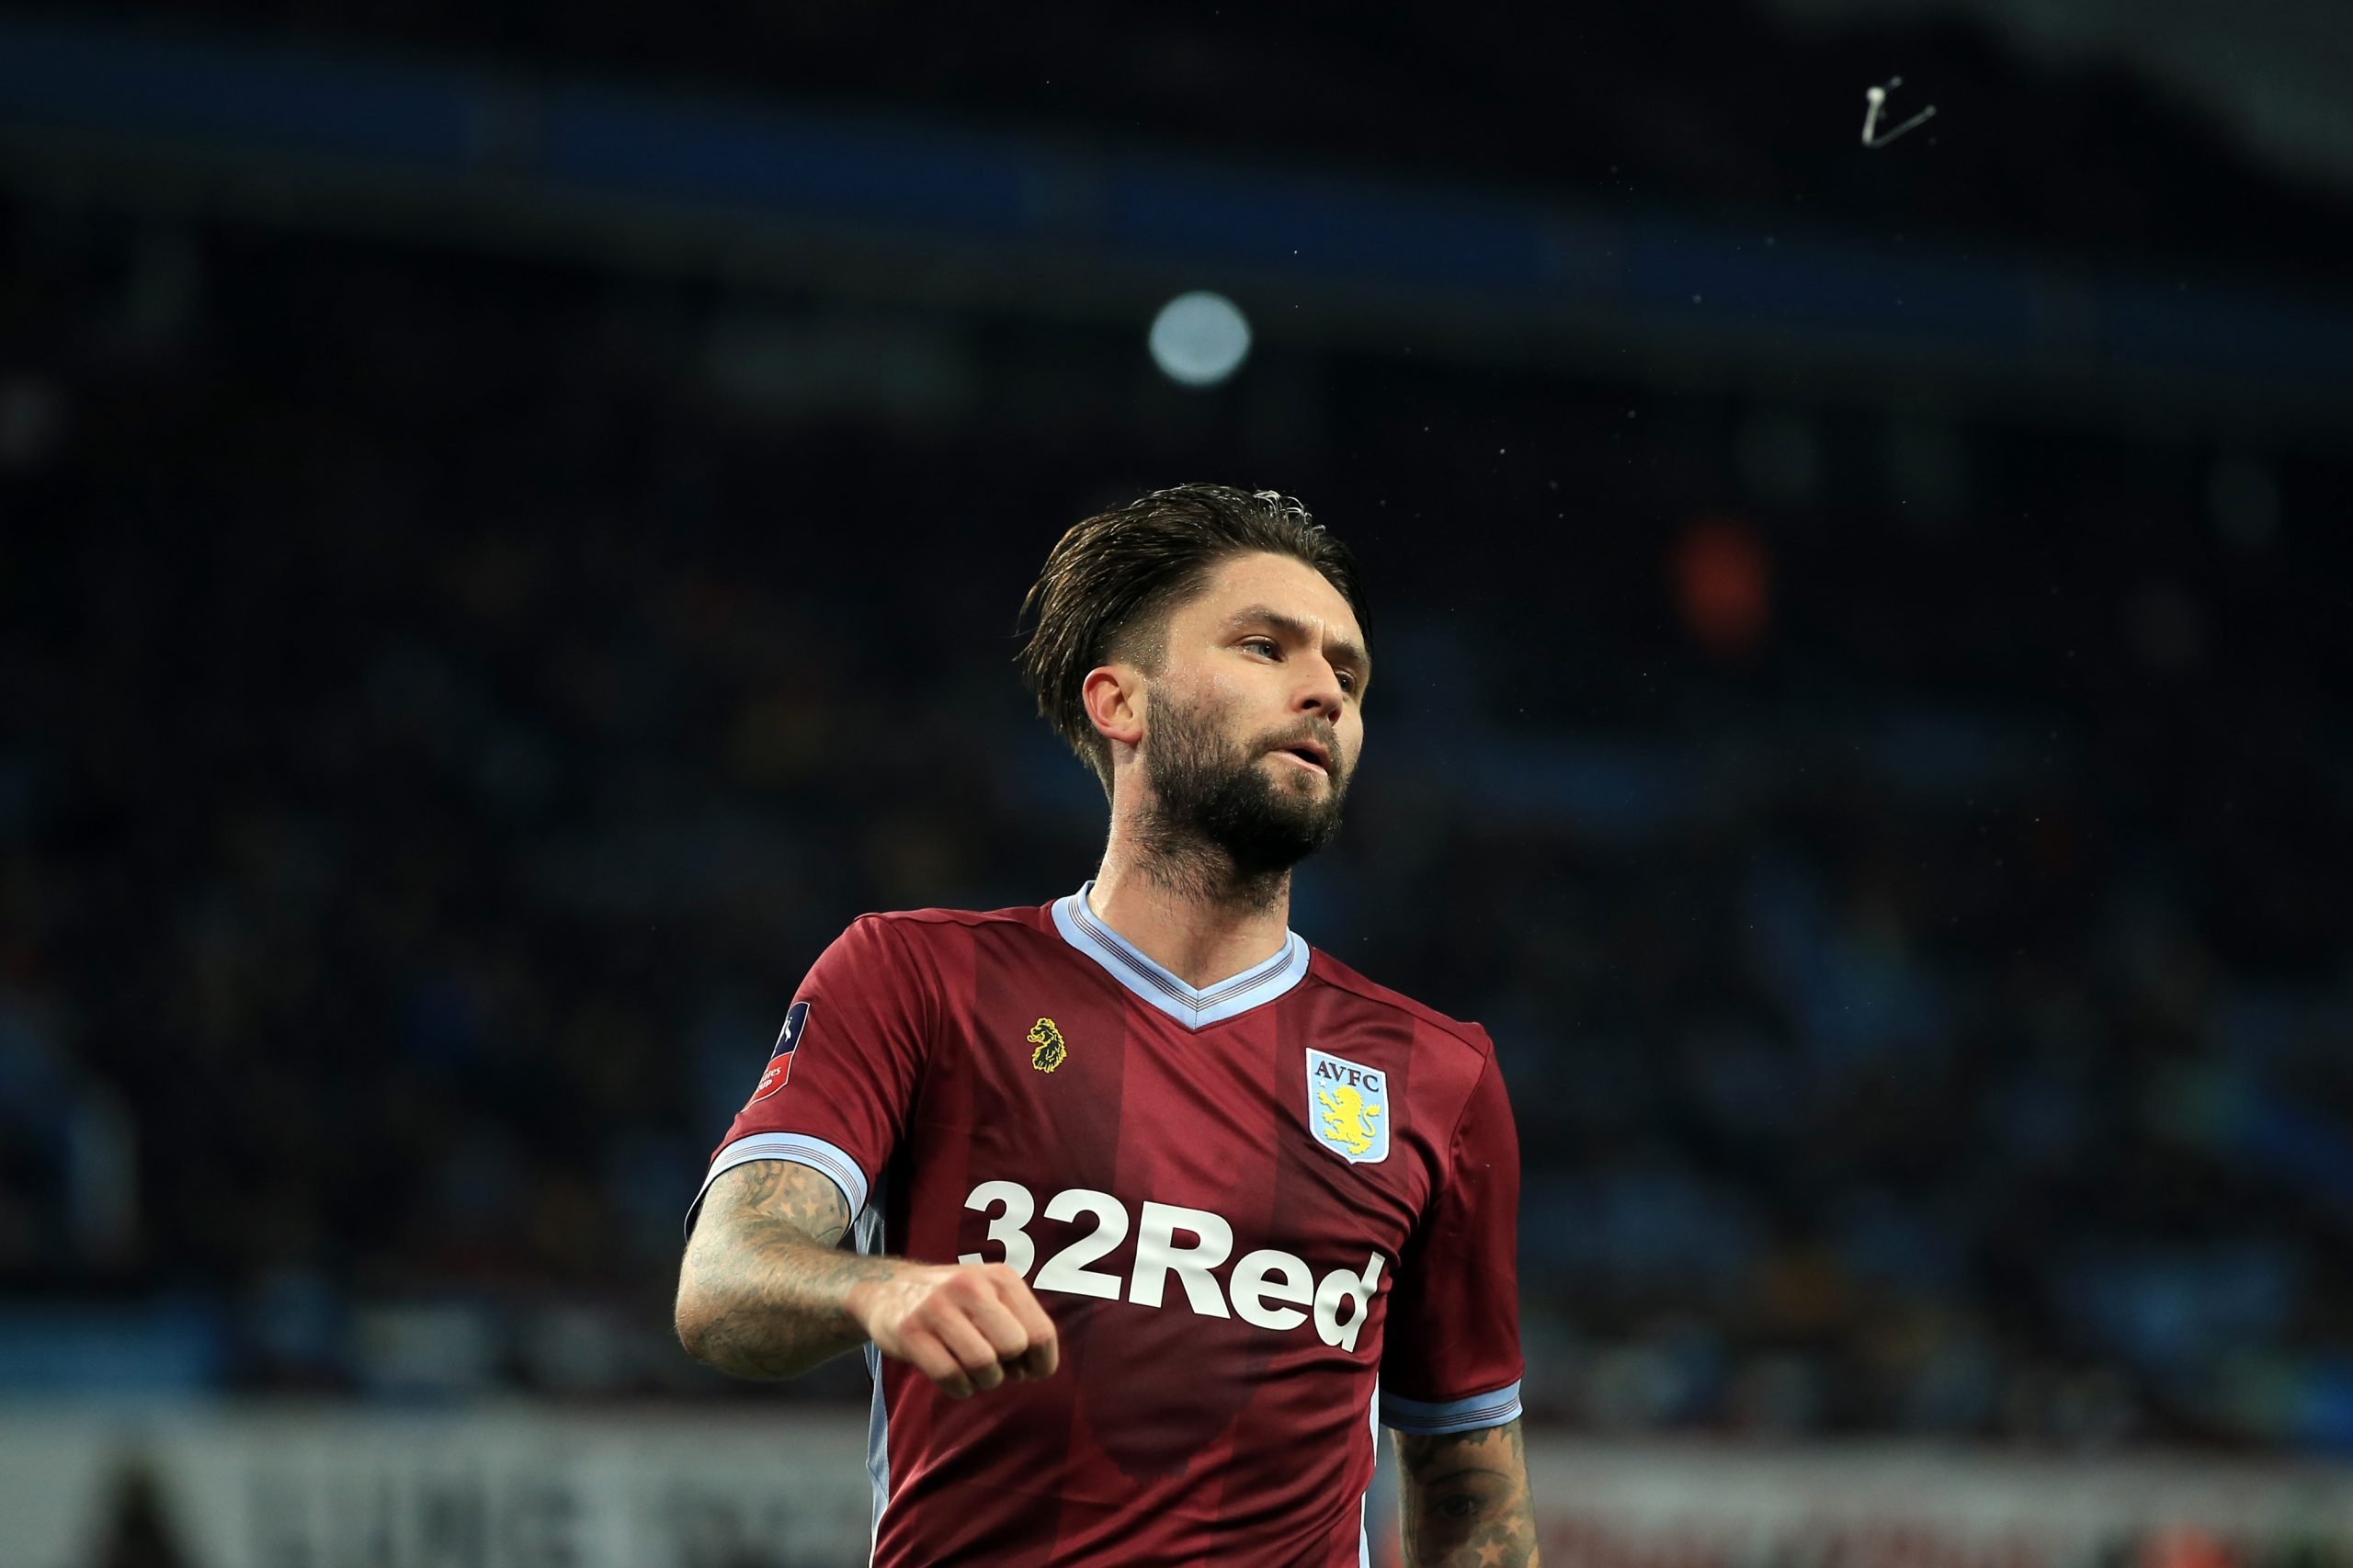 BIRMINGHAM, ENGLAND - JANUARY 05: Henri Lansbury of Aston Villa during the FA Cup Third Round match between Aston Villa and Swansea City at Villa Park on January 5, 2019 in Birmingham, United Kingdom. (Photo by Marc Atkins/Getty Images)